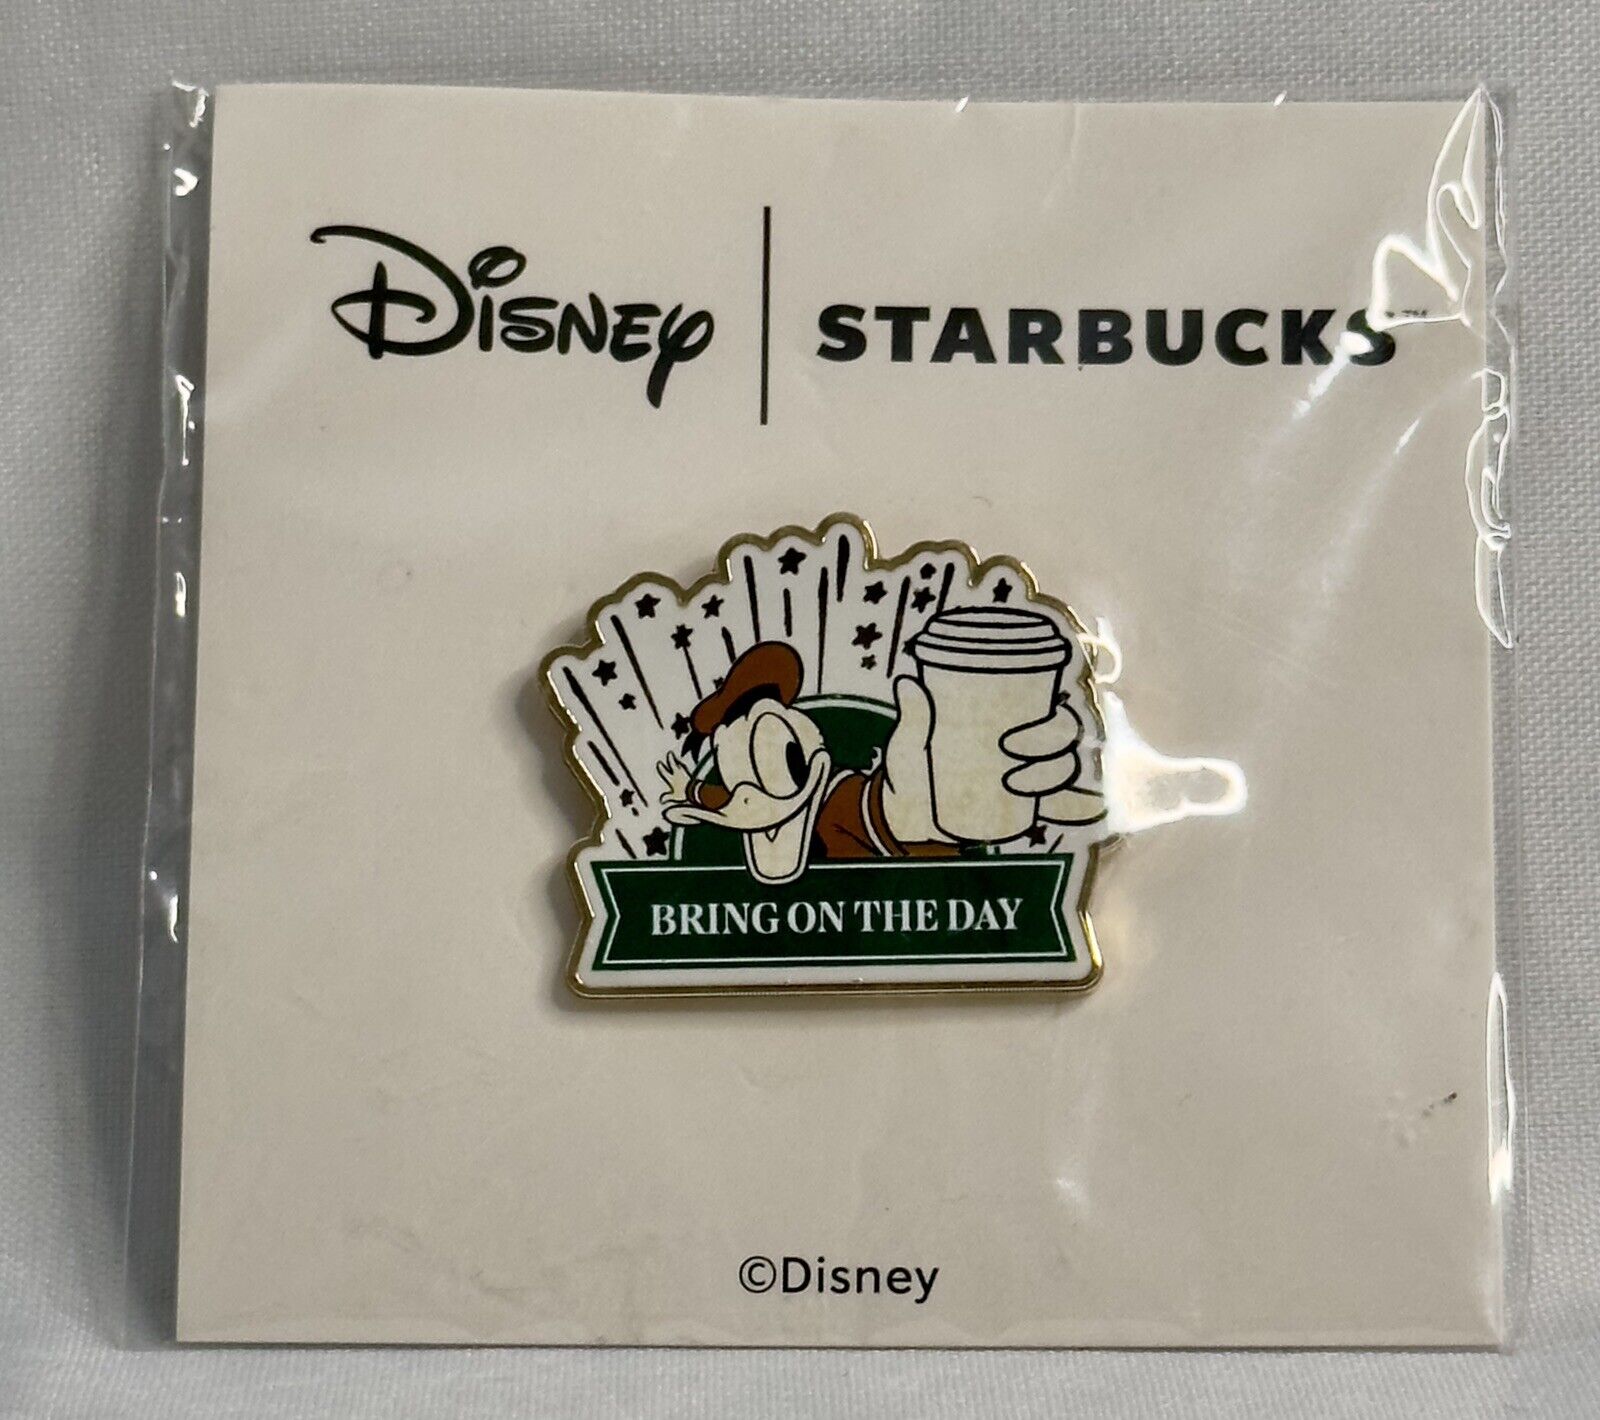 Disney + Starbucks Collectors Donald Duck Pin “Bring On The Day”